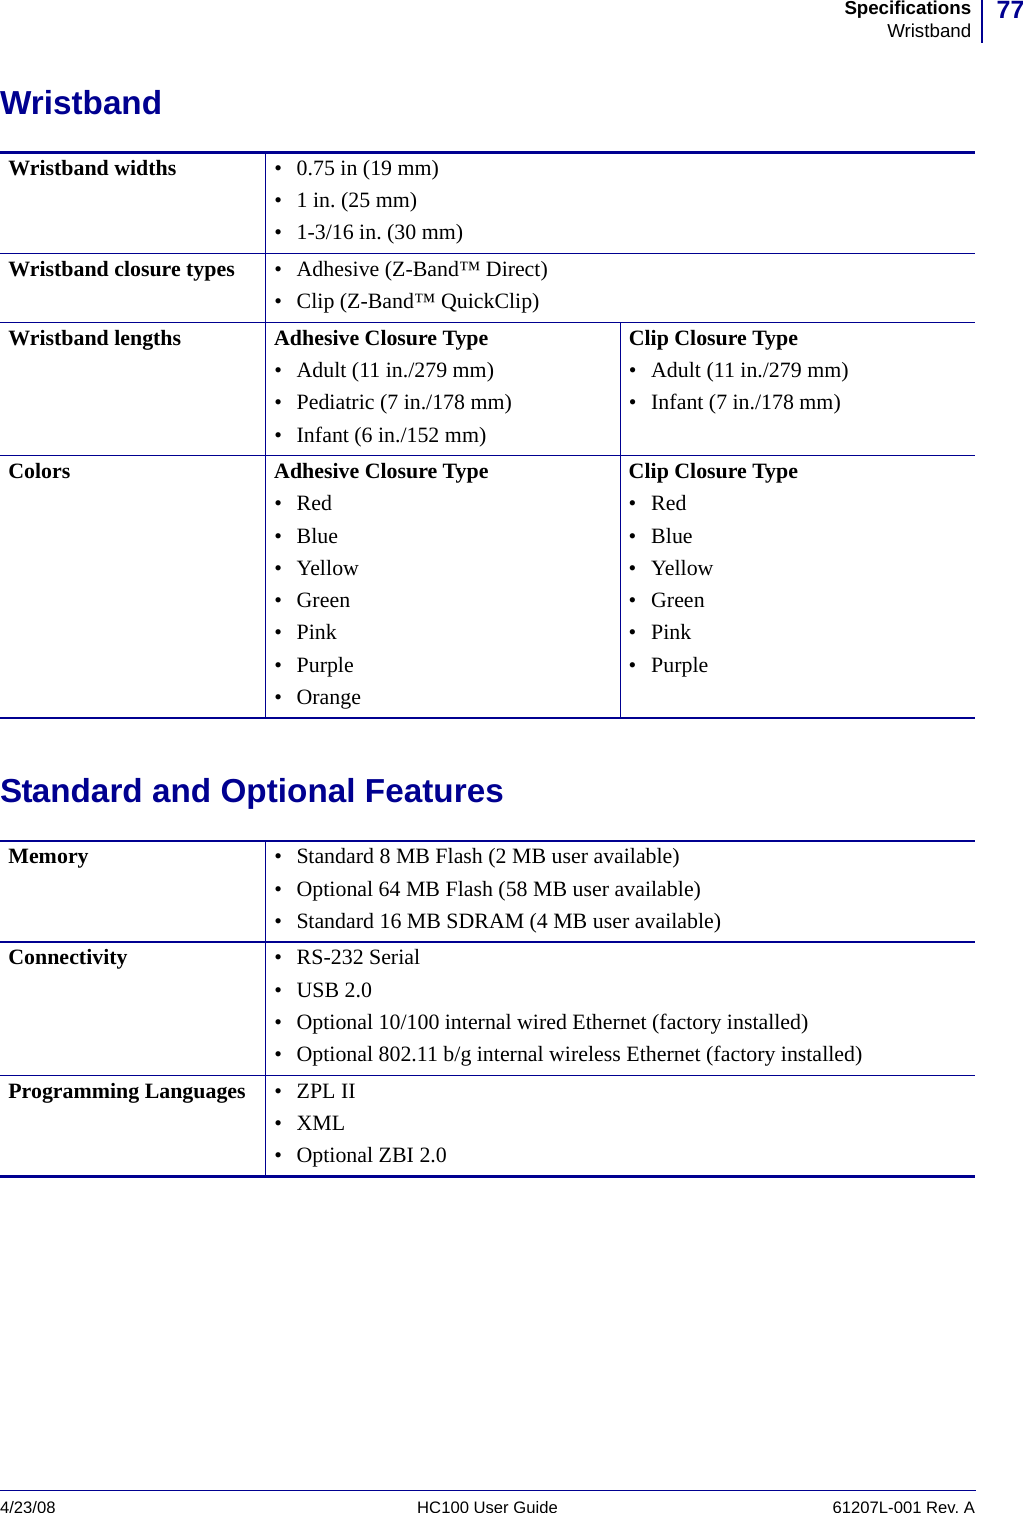 77SpecificationsWristband4/23/08 HC100 User Guide 61207L-001 Rev. AWristbandStandard and Optional FeaturesWristband widths • 0.75 in (19 mm)• 1 in. (25 mm)• 1-3/16 in. (30 mm)Wristband closure types • Adhesive (Z-Band™ Direct)• Clip (Z-Band™ QuickClip)Wristband lengths Adhesive Closure Type• Adult (11 in./279 mm)• Pediatric (7 in./178 mm)• Infant (6 in./152 mm)Clip Closure Type• Adult (11 in./279 mm)• Infant (7 in./178 mm)Colors Adhesive Closure Type•Red•Blue• Yellow• Green•Pink•Purple•OrangeClip Closure Type•Red•Blue•Yellow•Green•Pink• PurpleMemory • Standard 8 MB Flash (2 MB user available)• Optional 64 MB Flash (58 MB user available)• Standard 16 MB SDRAM (4 MB user available)Connectivity • RS-232 Serial•USB 2.0• Optional 10/100 internal wired Ethernet (factory installed)• Optional 802.11 b/g internal wireless Ethernet (factory installed)Programming Languages •ZPL II•XML• Optional ZBI 2.0